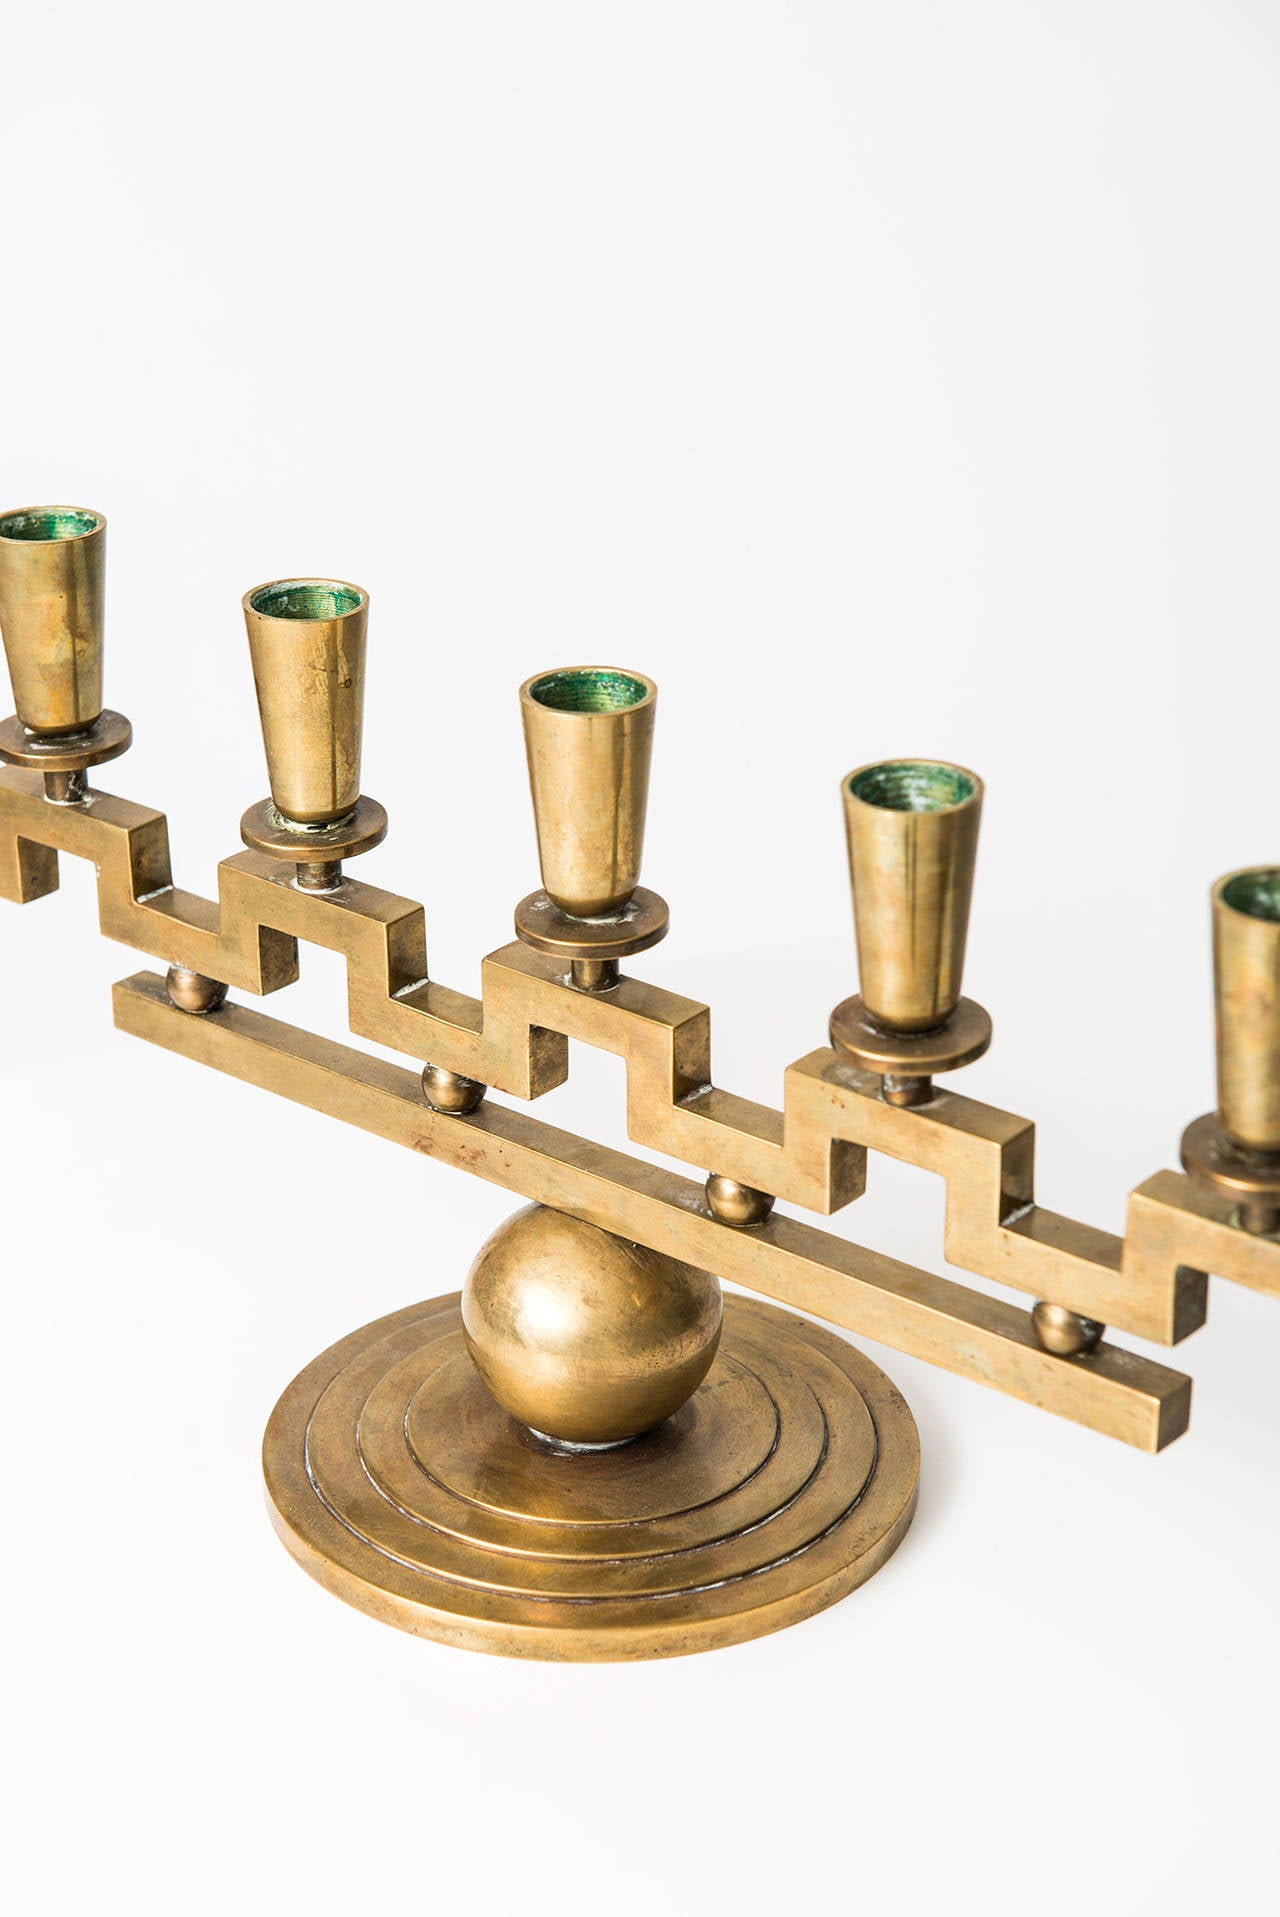 Swedish Lars Holmström Candlestick in Brass Produced in Arvika